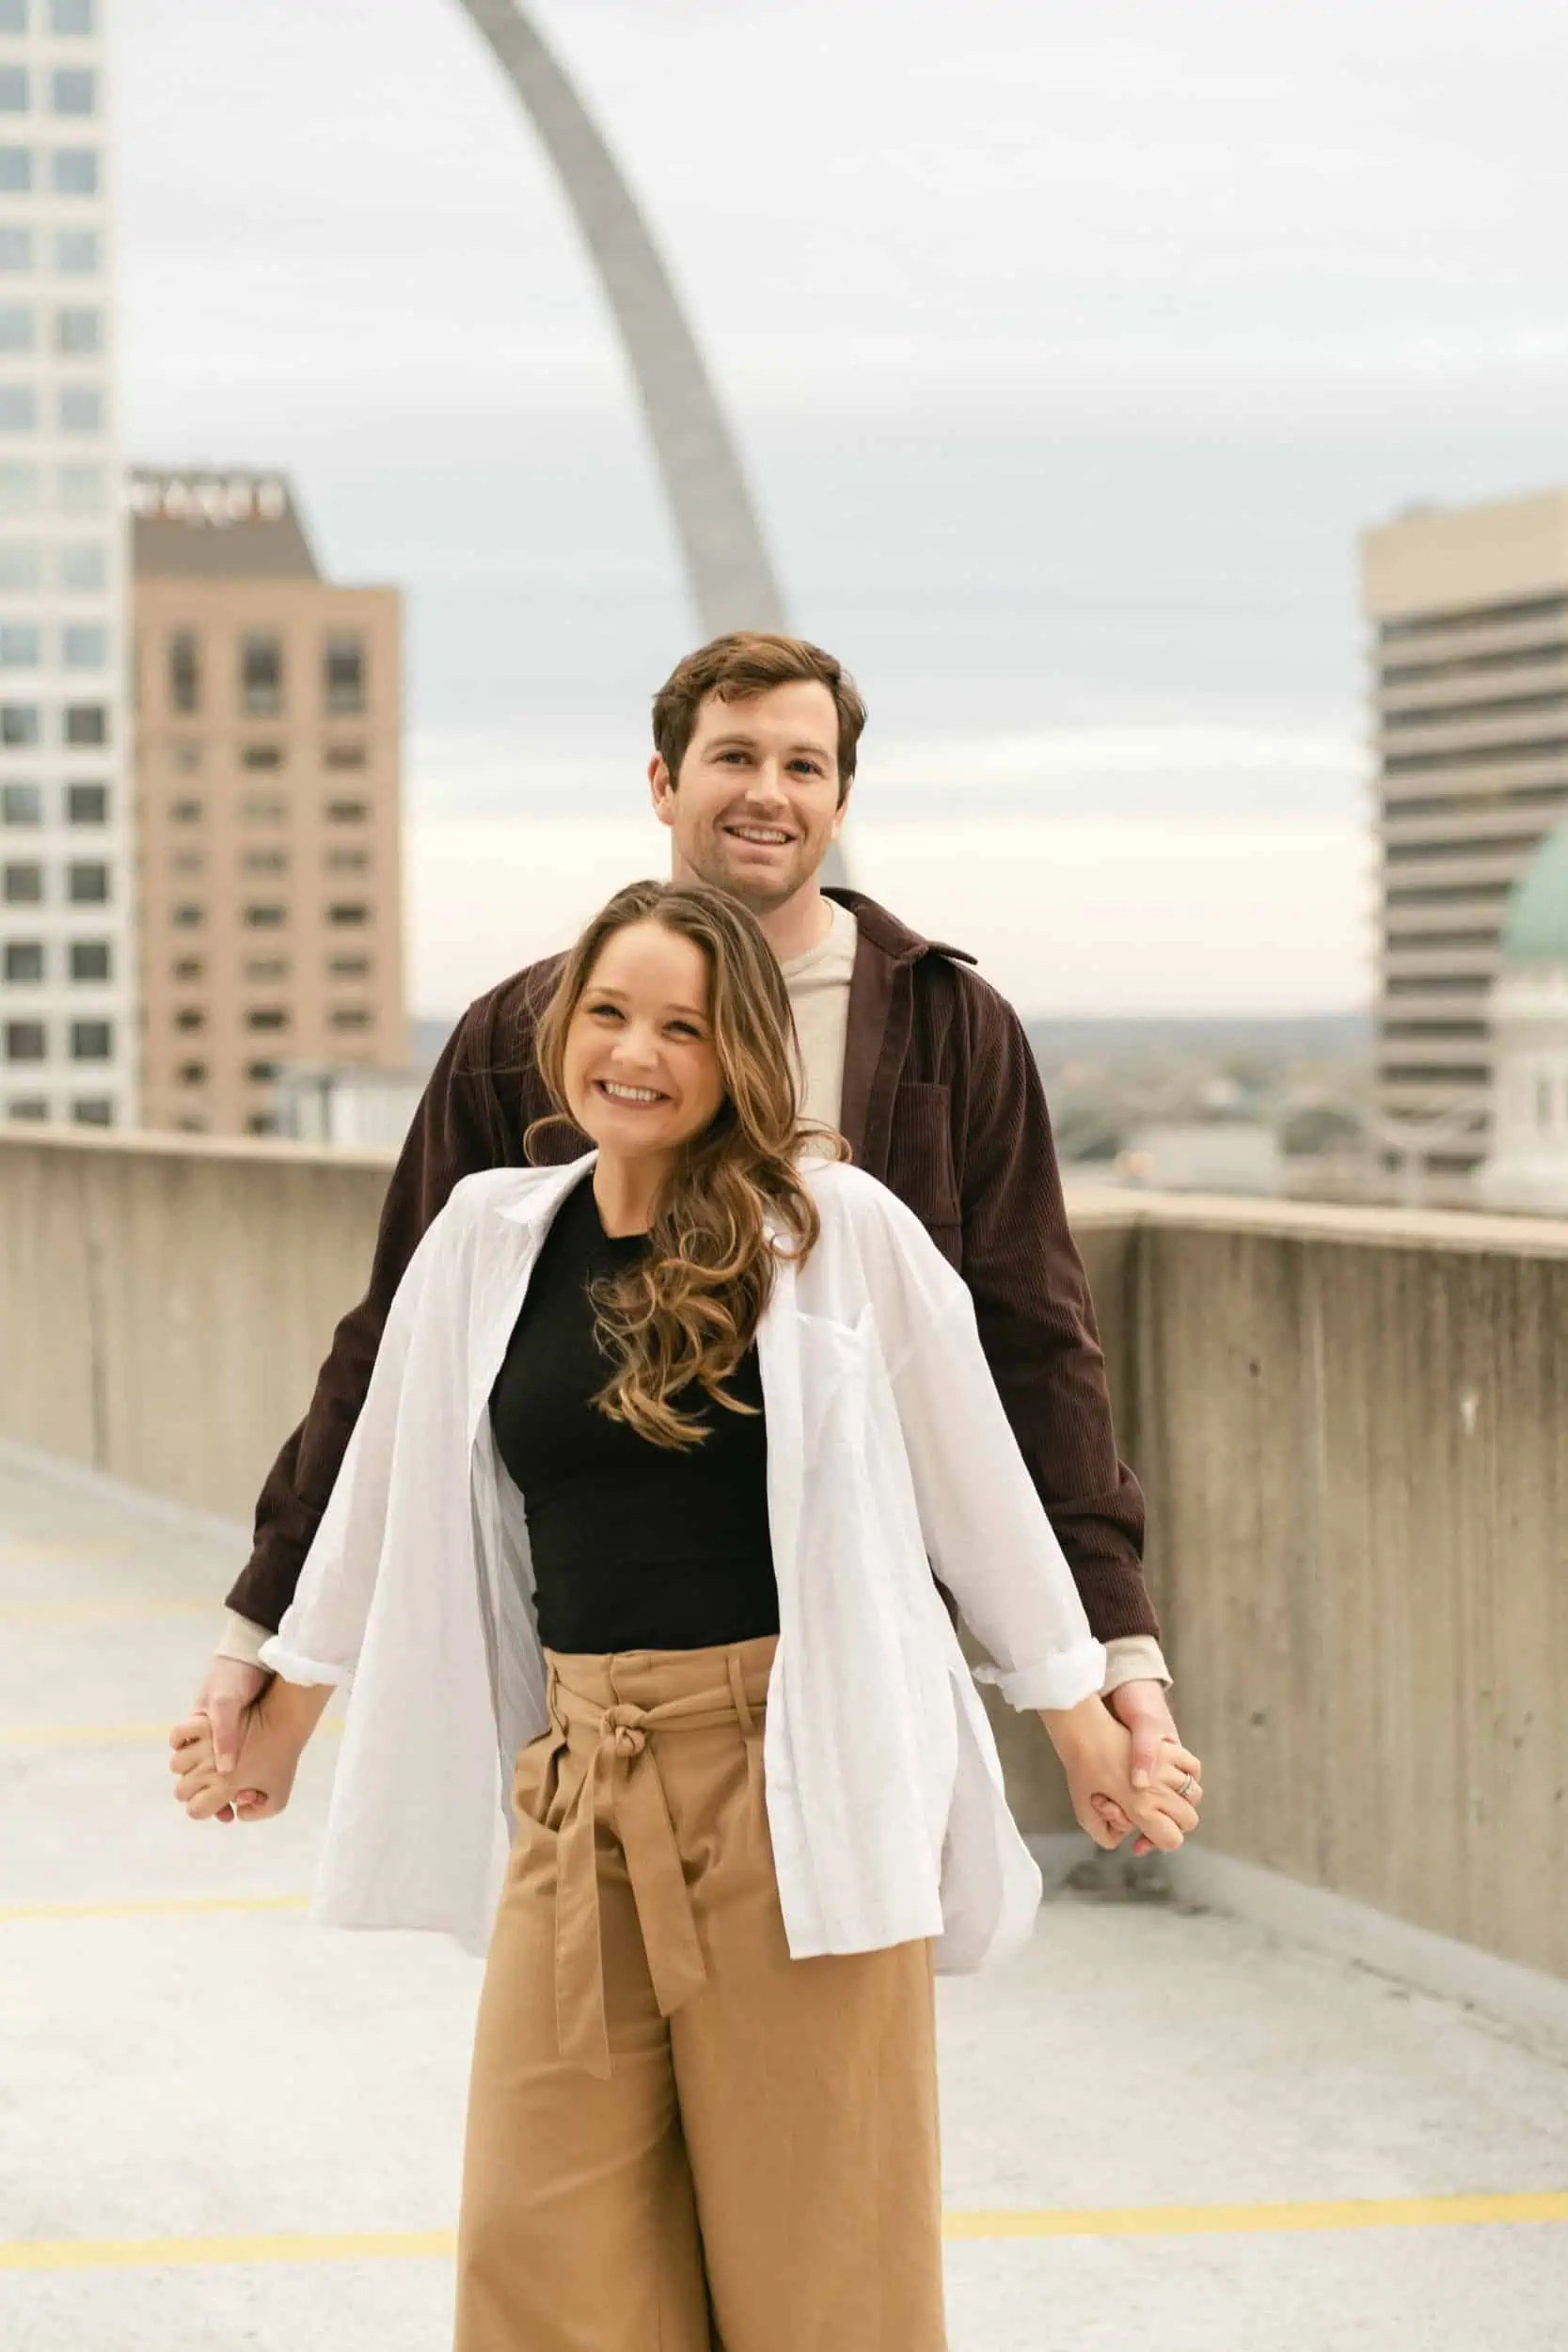 A couple smiling and holding hands on a rooftop in St. Louis with the Arch in the background, shot by Stacey Vandas Photography.